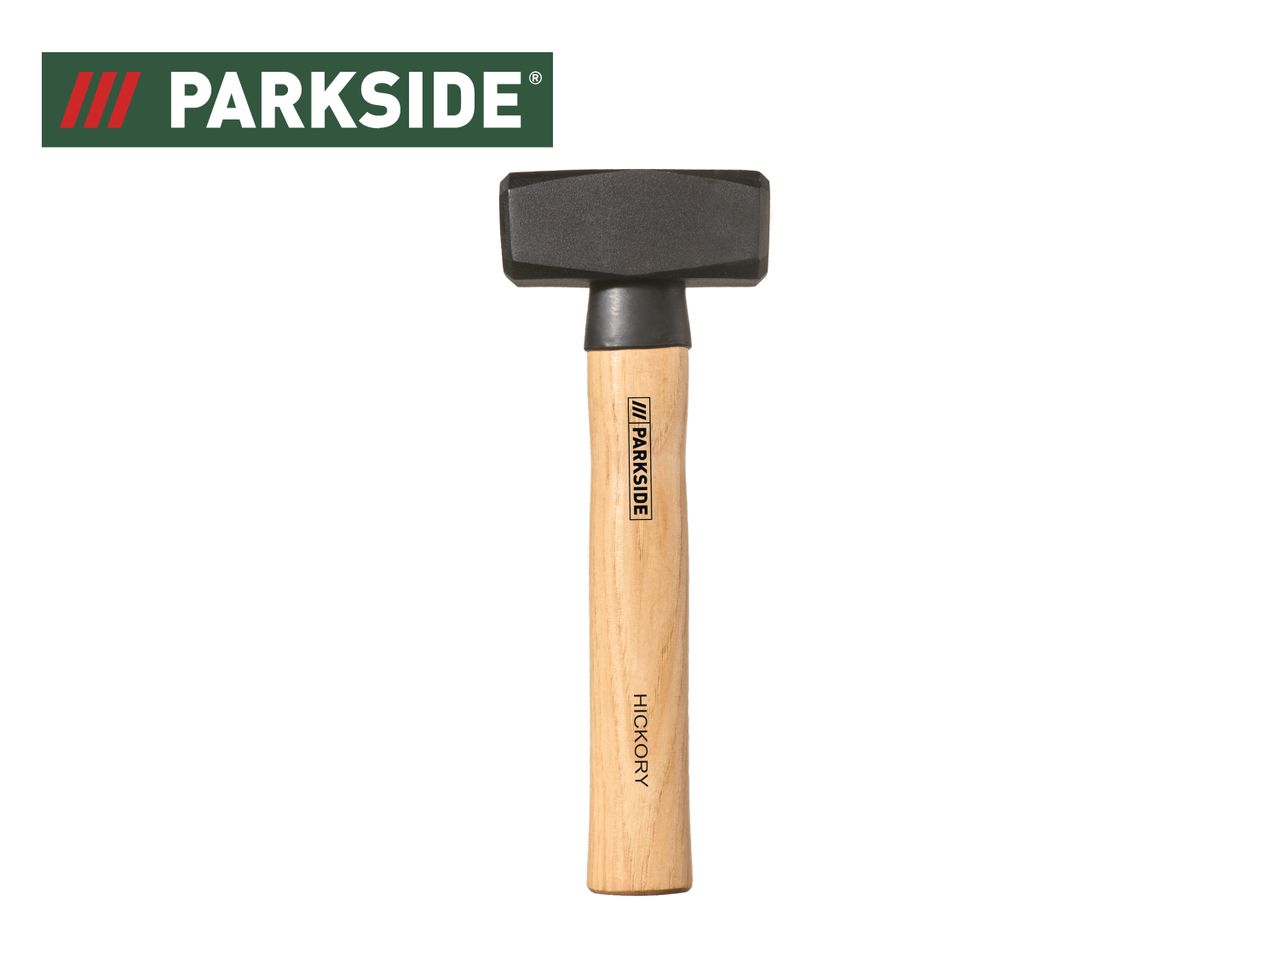 Go to full screen view: Parkside Hammer - Image 1